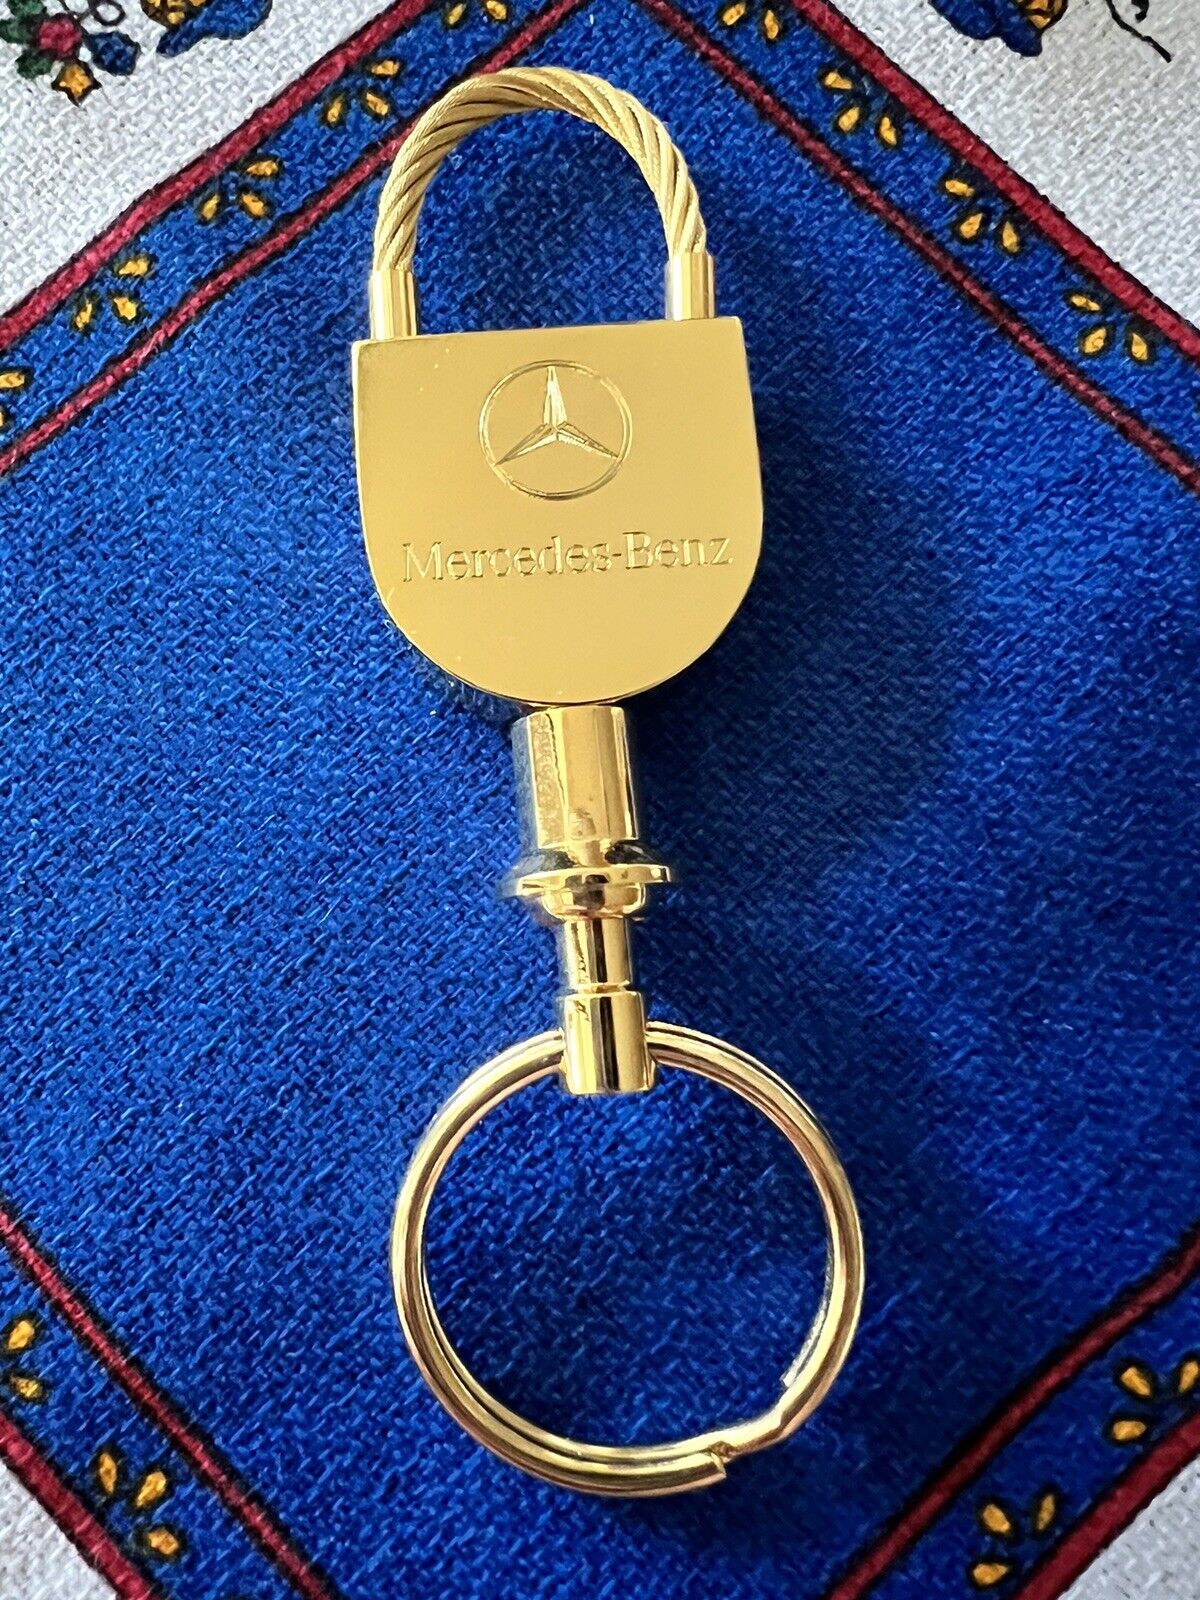 VTG Mercedes-Benz Dealer Keychain 24 Gold Plate In Mint New Cond Collectors Itm